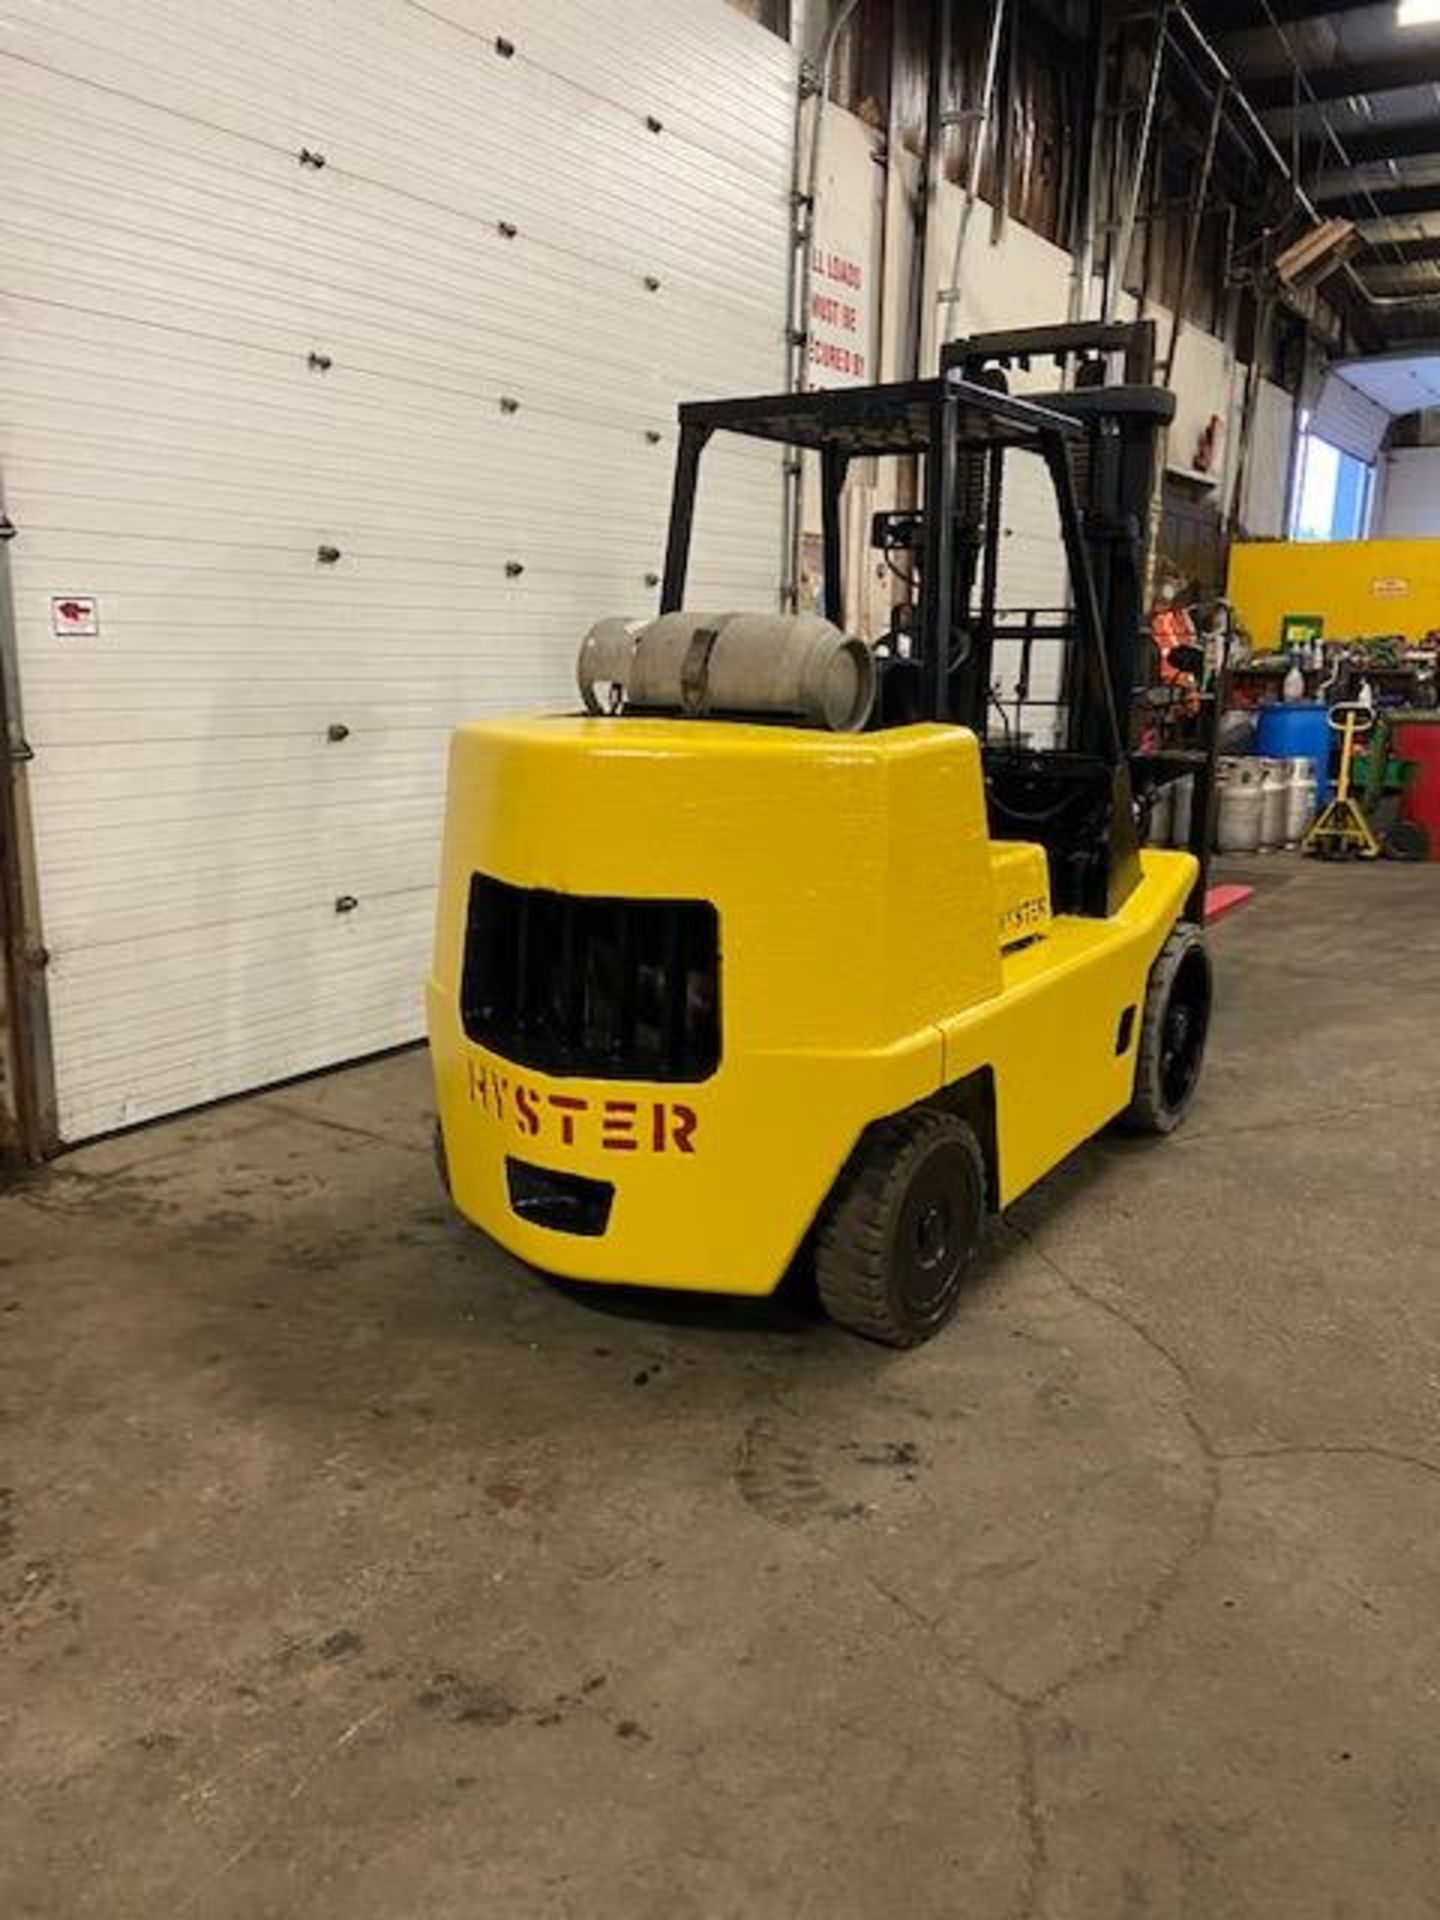 FREE CUSTOMS - Hyster 15500lbs capacity LPG (propane) Forklift with 3-stage mast & (no - Image 3 of 3